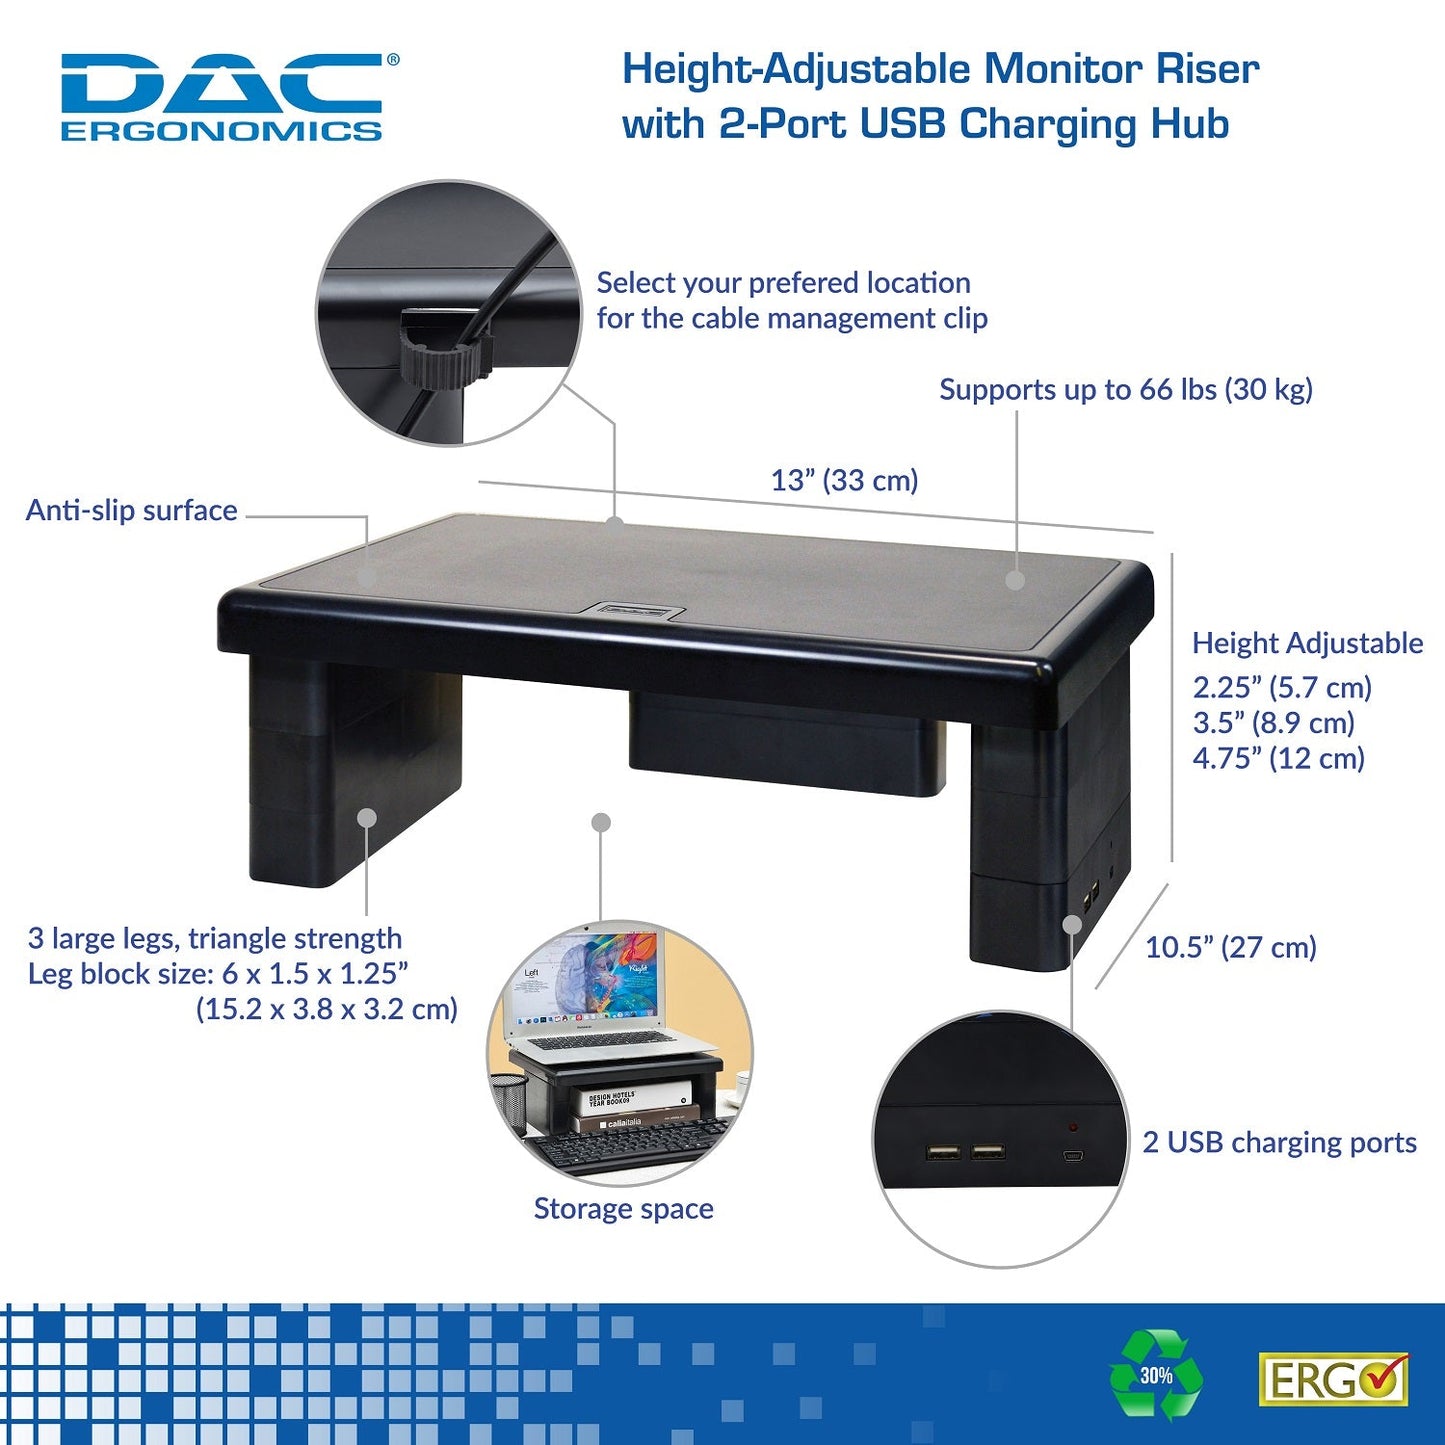 DAC® Stax MP-213 Height-Adjustable Monitor/Laptop Stand with 2-USB Ports, Black